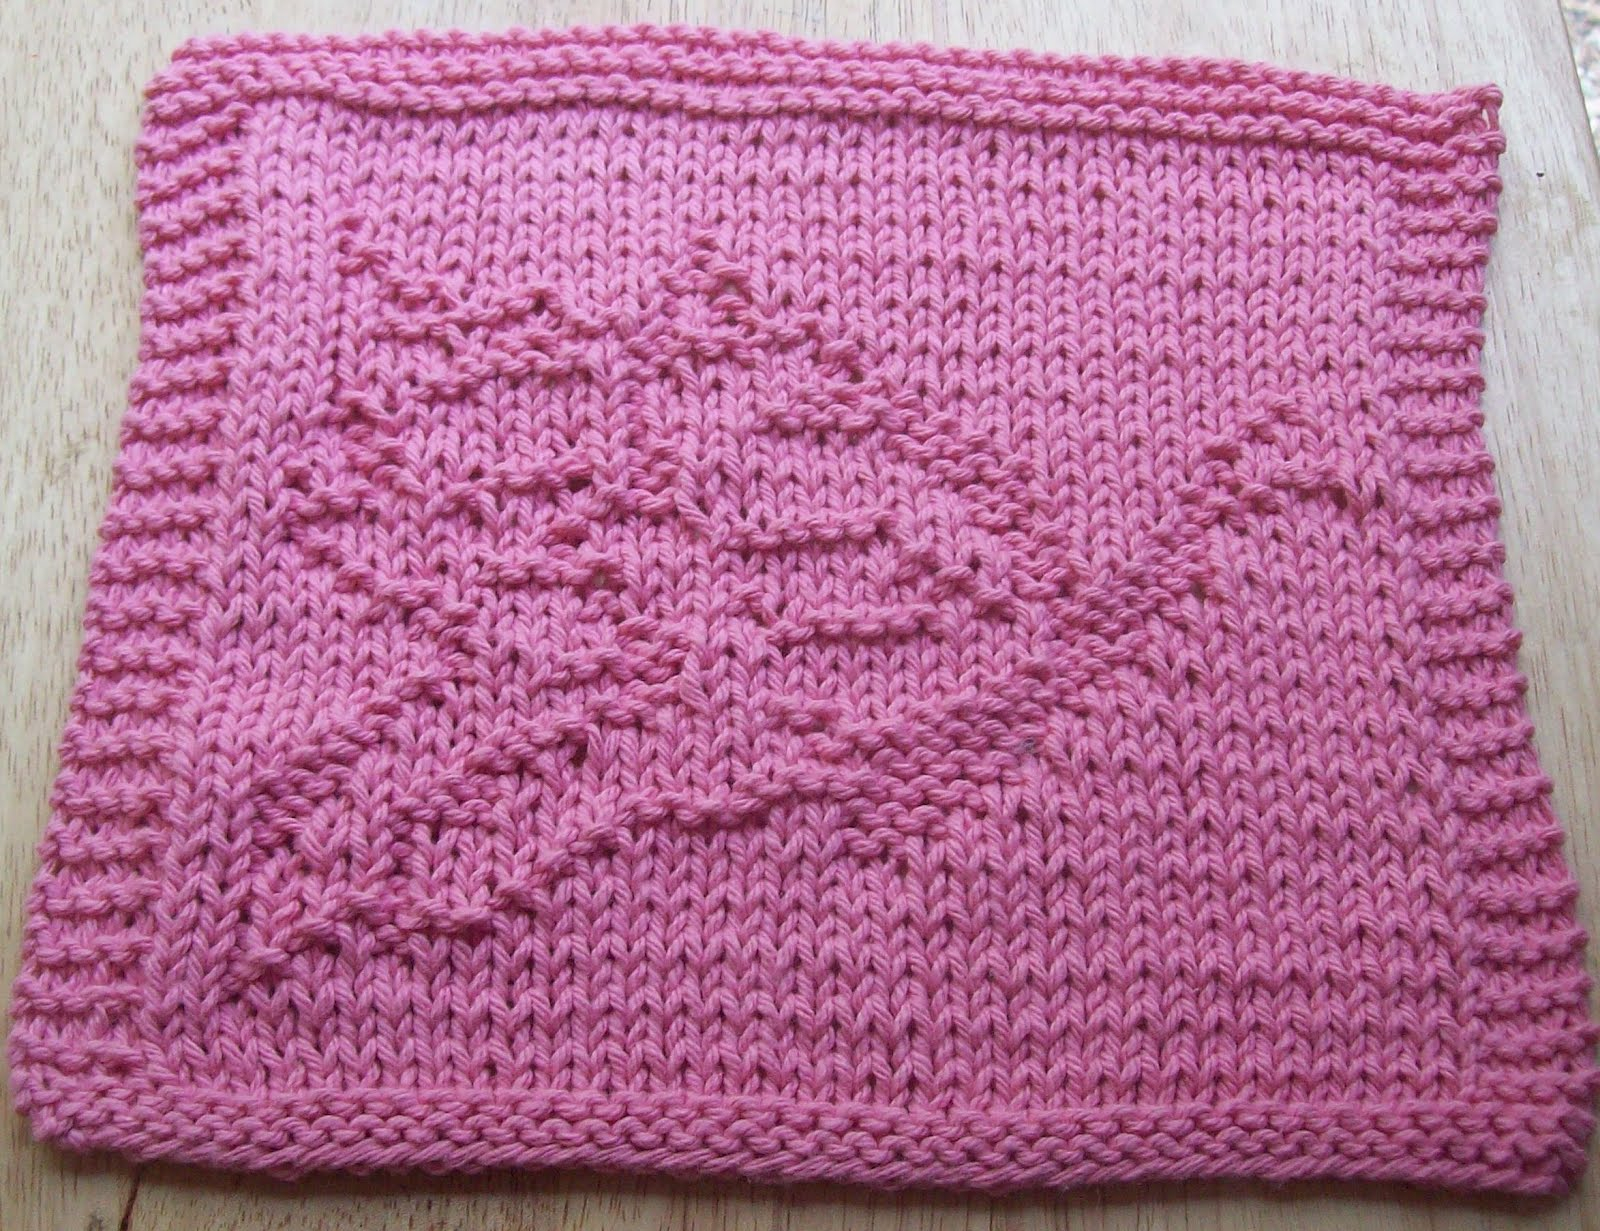 Knitted Butterfly Dishcloth Pattern Digknitty Designs Another Butterfly Knit Dishcloth Pattern